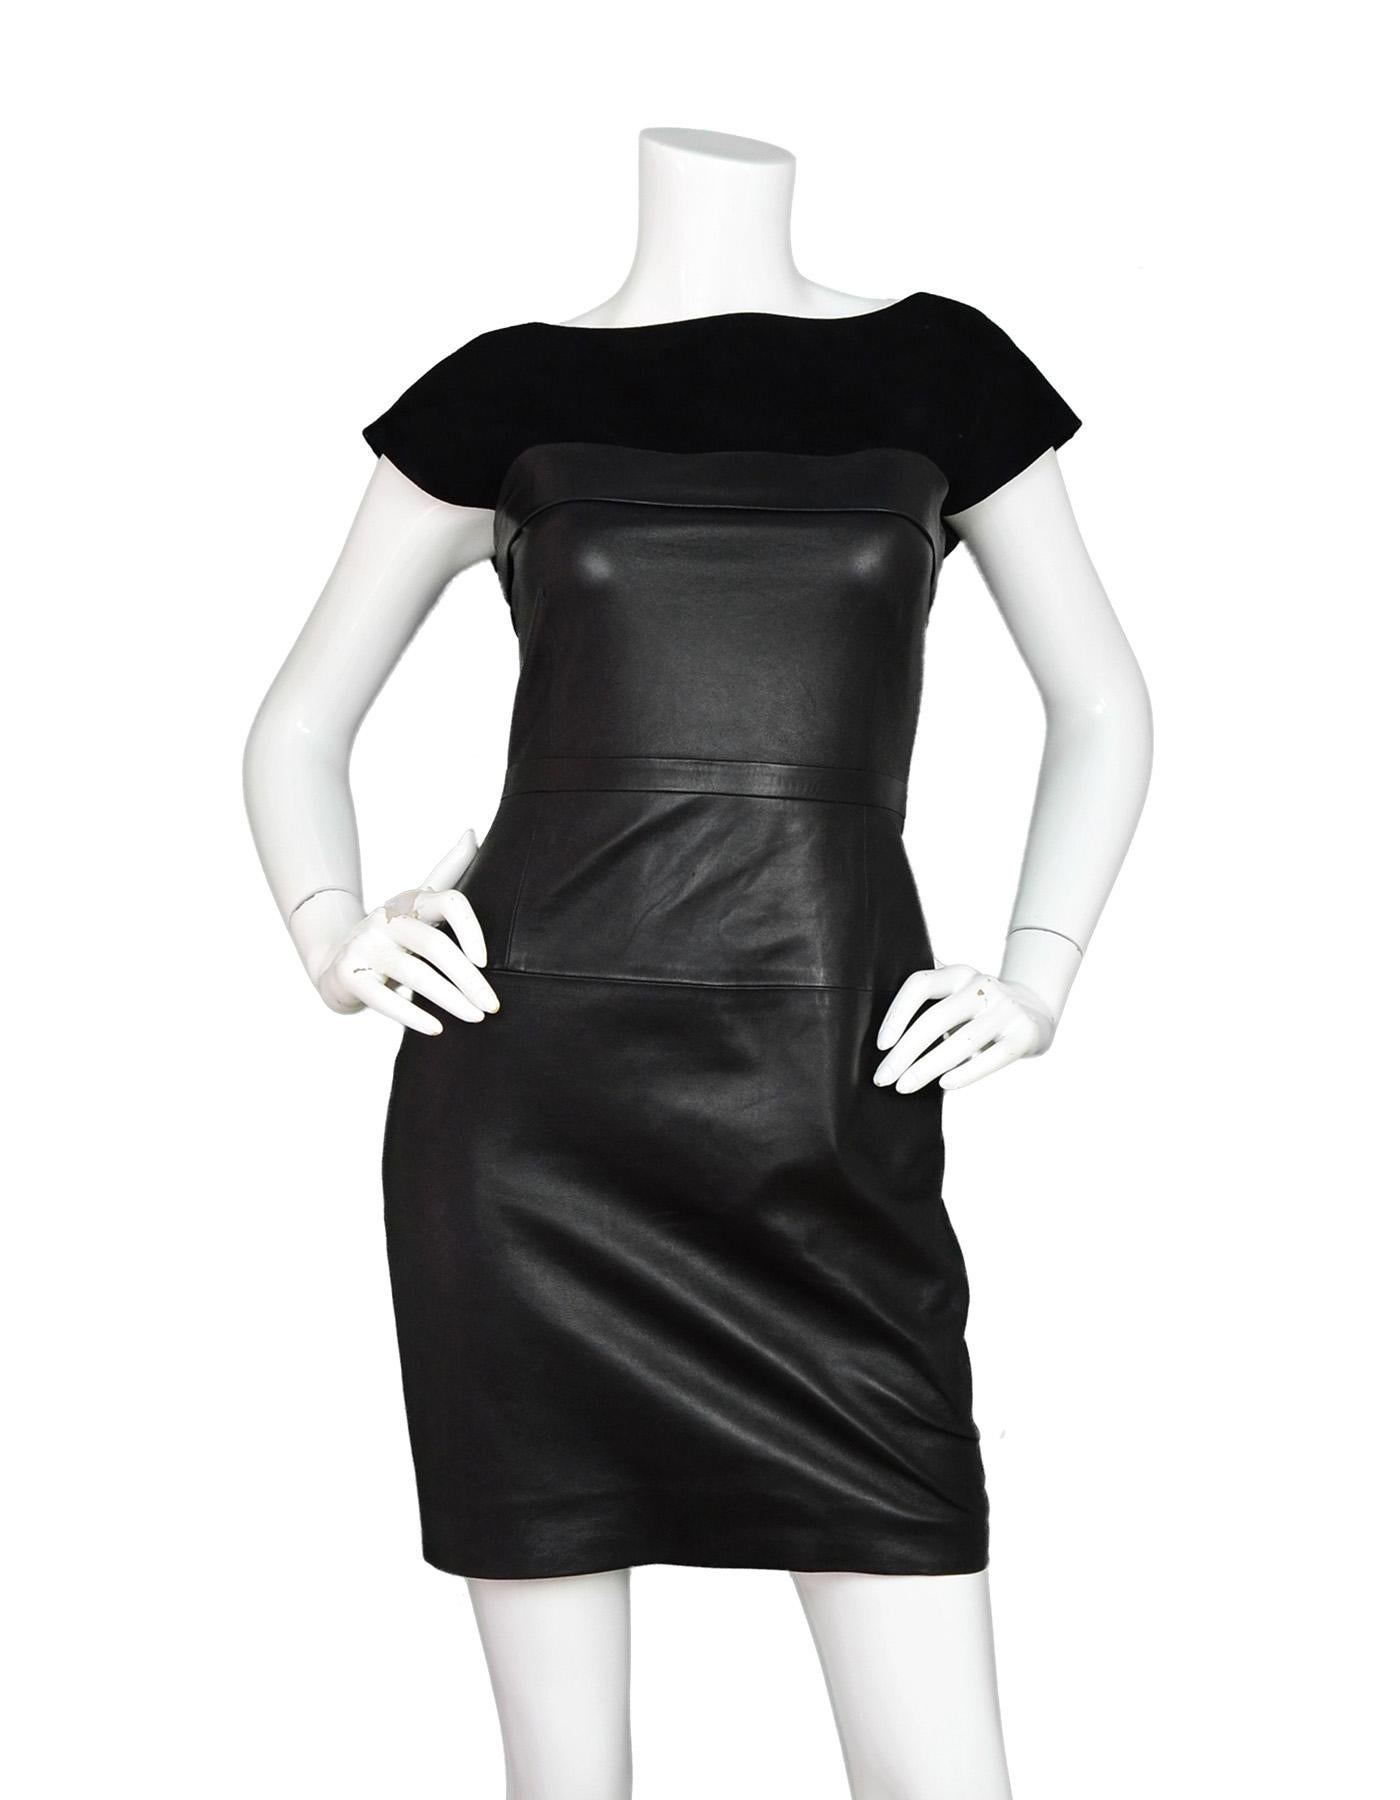 Gucci Black Sleeveless Leather Dress W/ Suede Bodice sz 38 (US XS)

Made In: Italy
Color: Black
Materials: Leather and suede (no composition tag)
Lining:  Black textile 
Opening/Closure: Hidden back zipper
Overall Condition: Excellent pre-owned